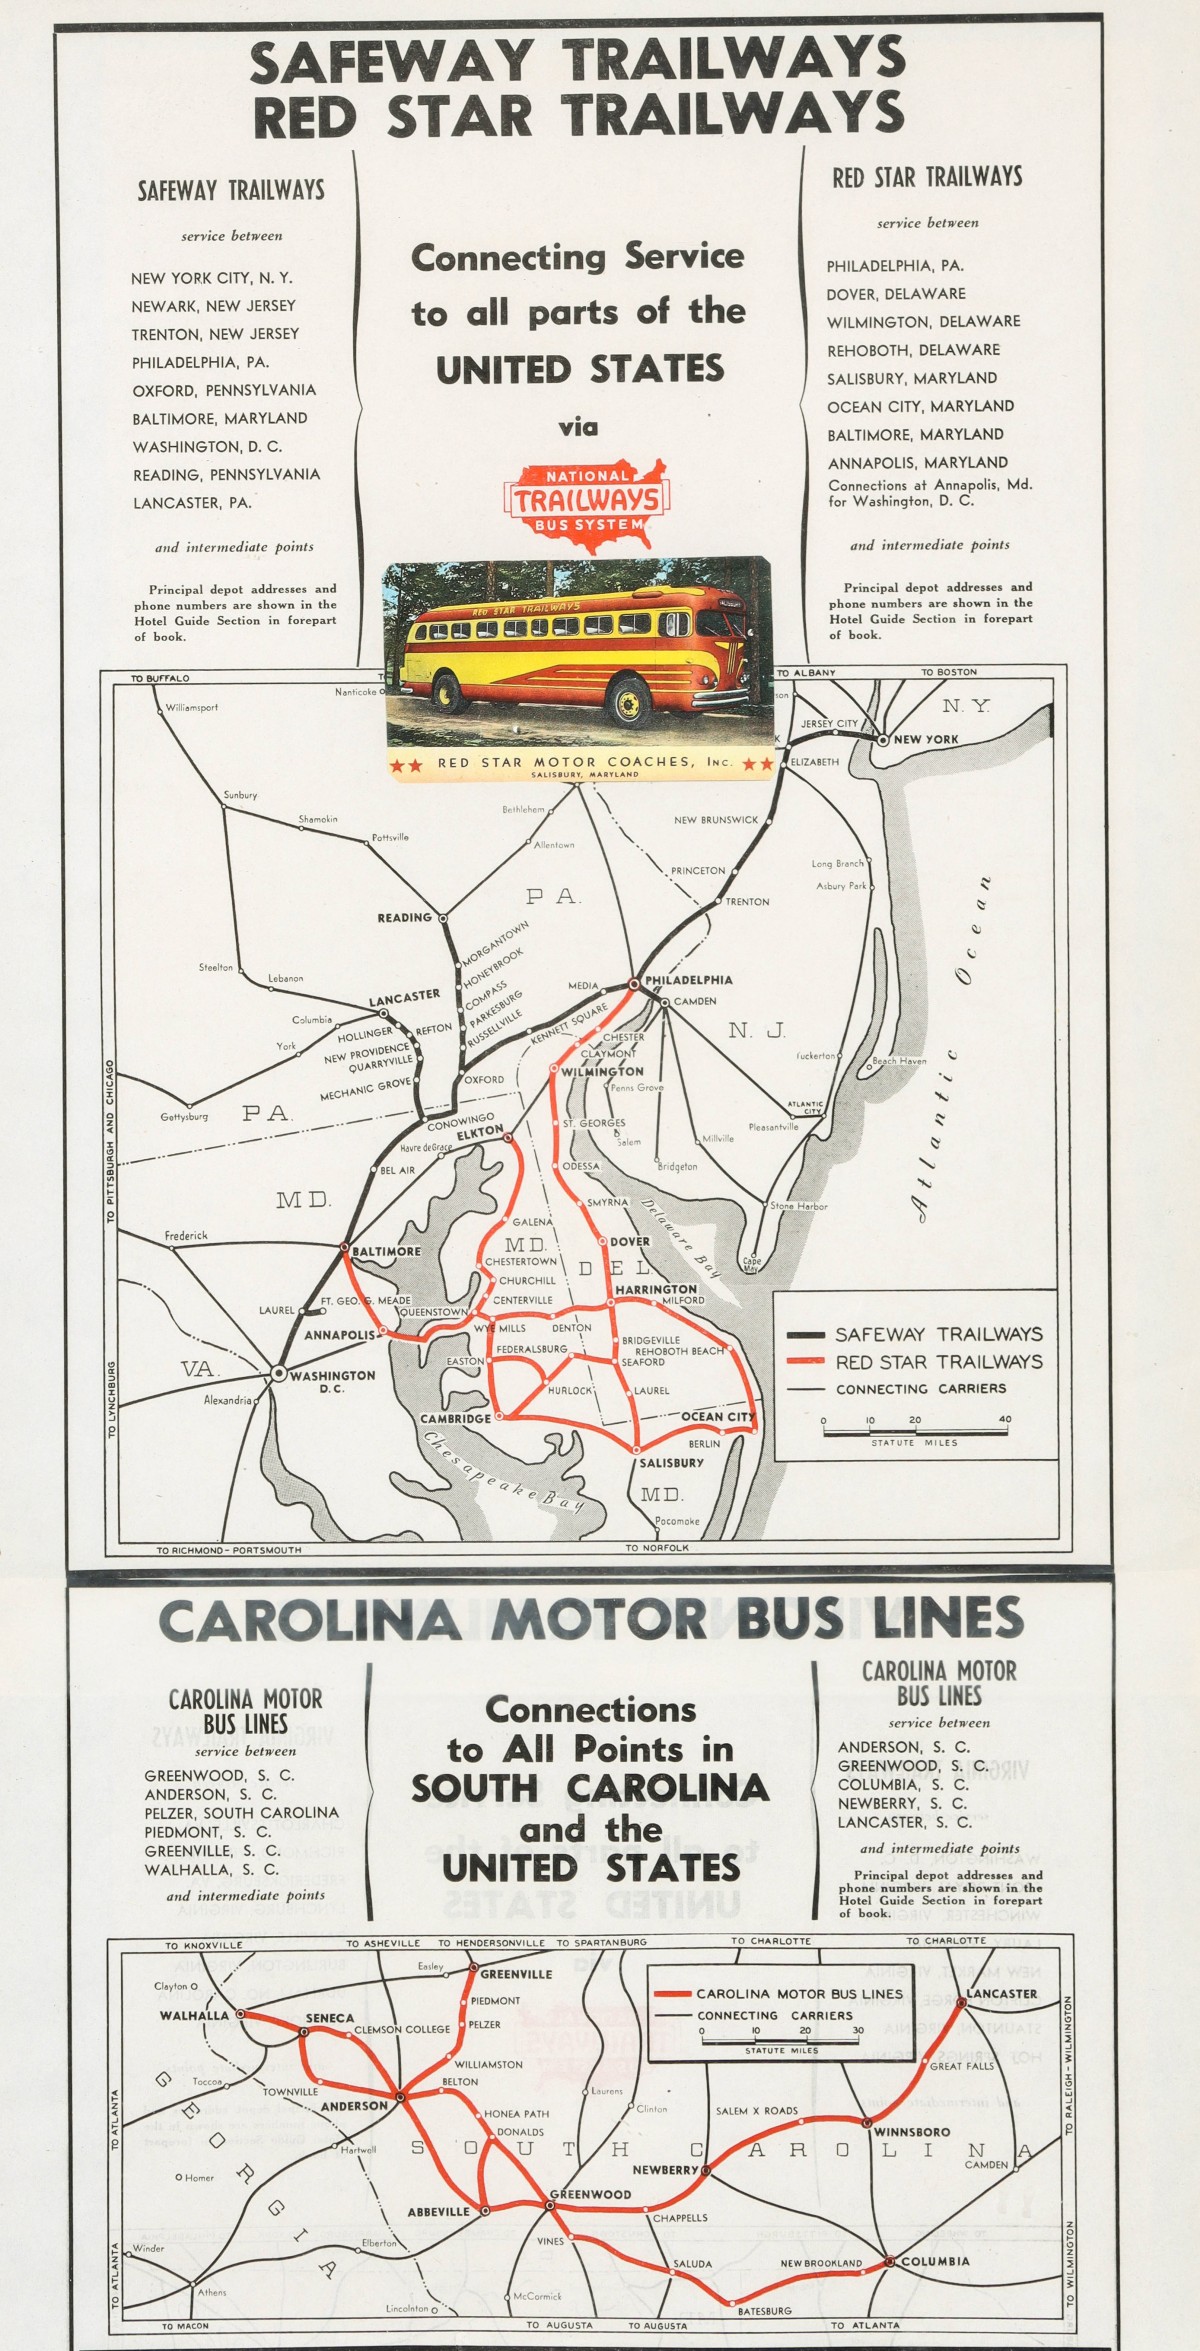 TRAILWAYS BUS SYSTEM, TOBACCO ADVERTISING AND STEAMSHIP